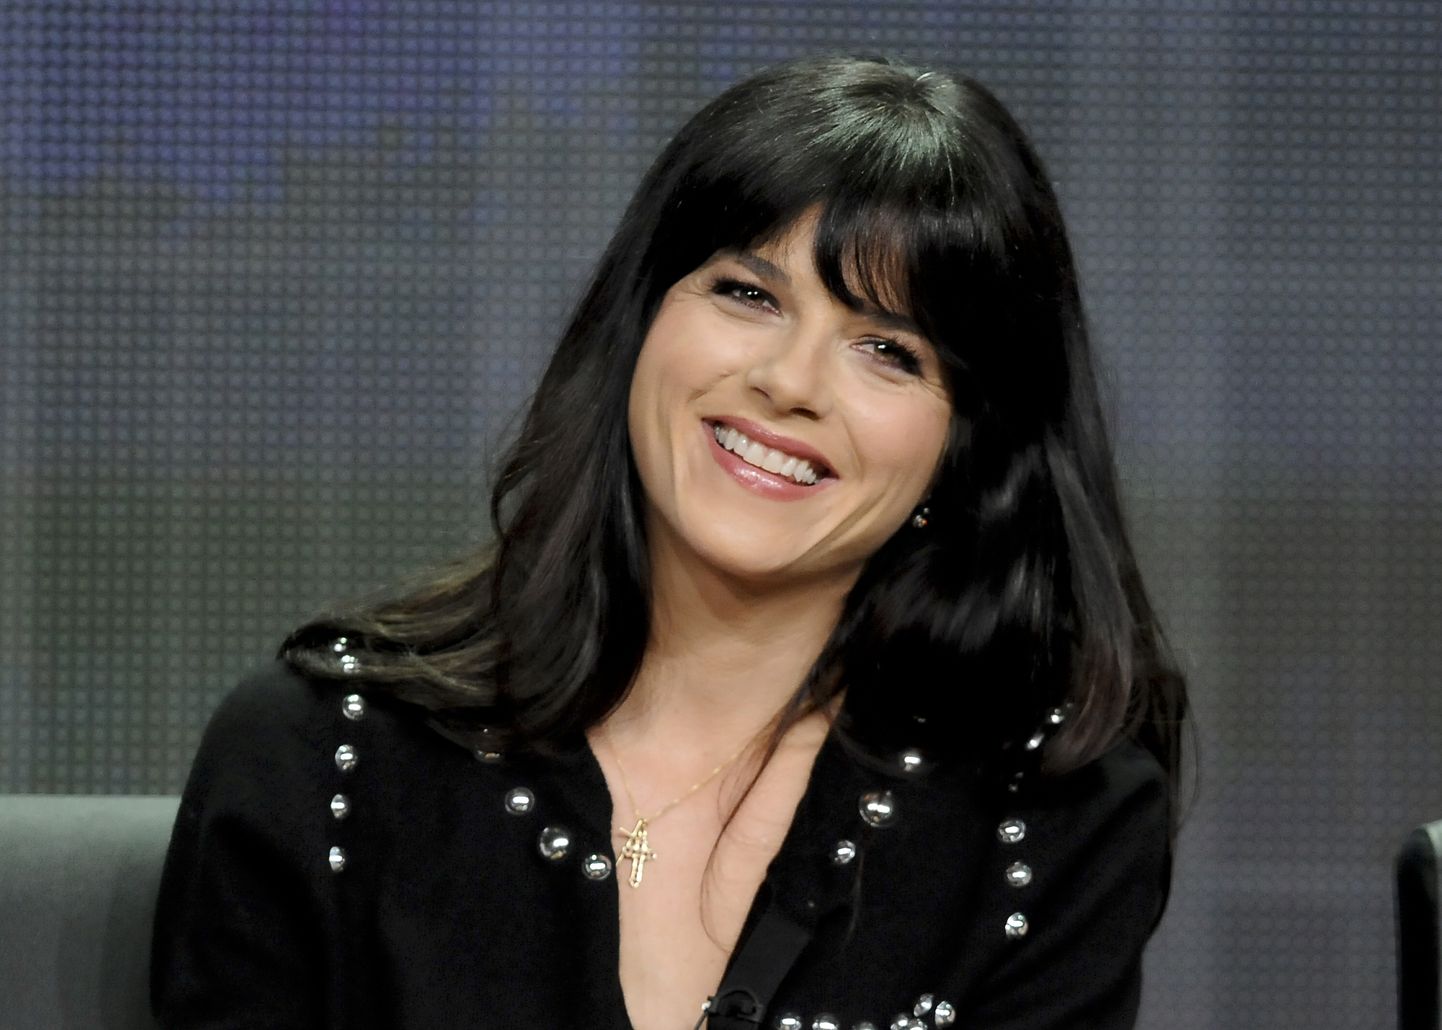 Actress Selma Blair from the FX show "Anger Management" takes part in a panel discussion at the FX Networks session of the 2012 Television Critics Association Summer Press Tour in Beverly Hills, California, July 28, 2012. REUTERS/Gus Ruelas (UNITED STATES - Tags: ENTERTAINMENT)